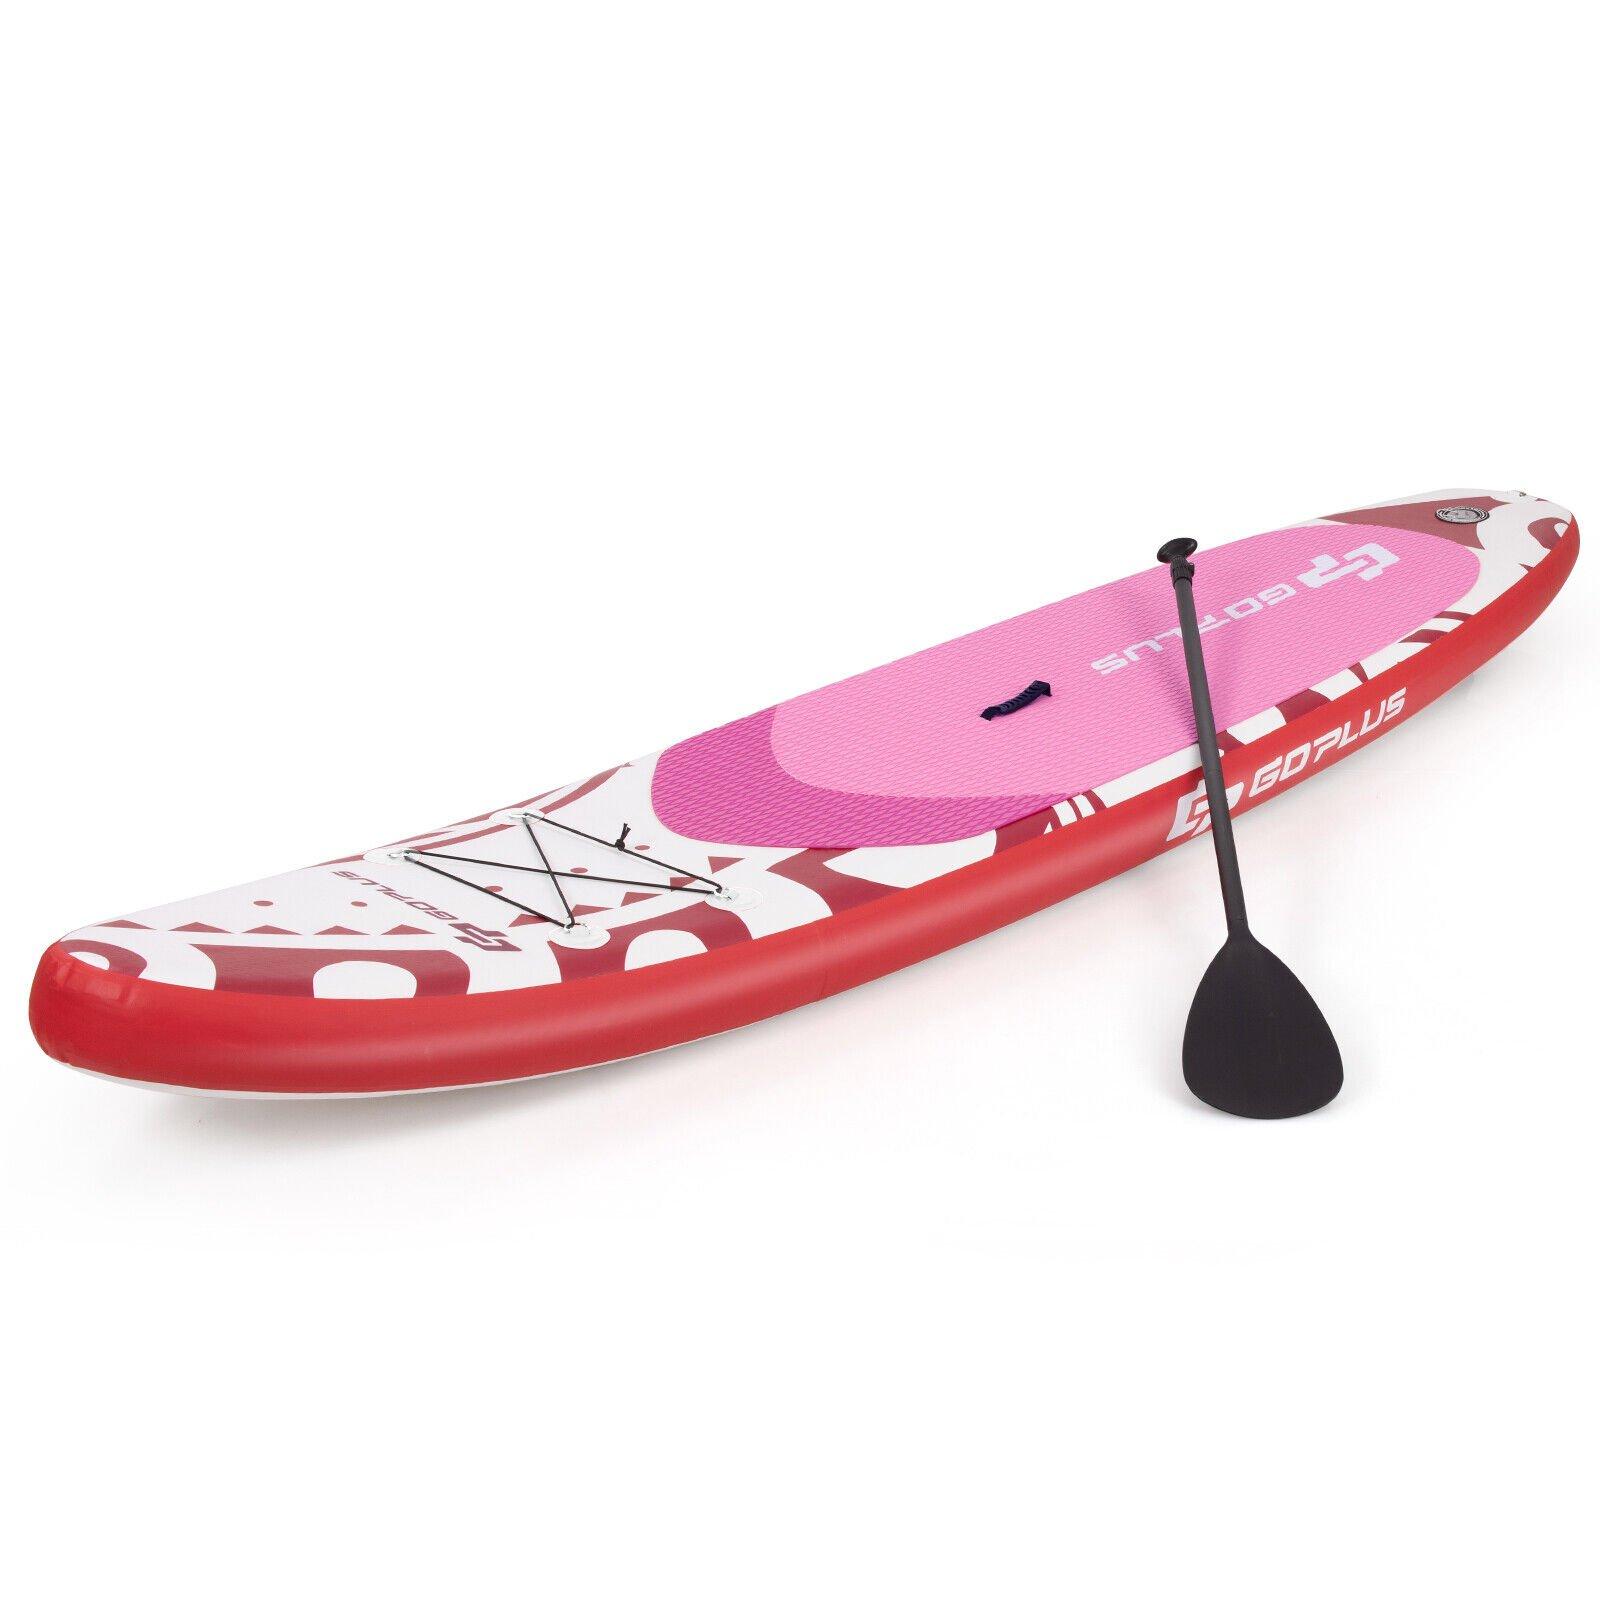 10.5FT Inflatable Stand Up Paddle Board Lightweight 76cm Thick SUP W/Carry Bag